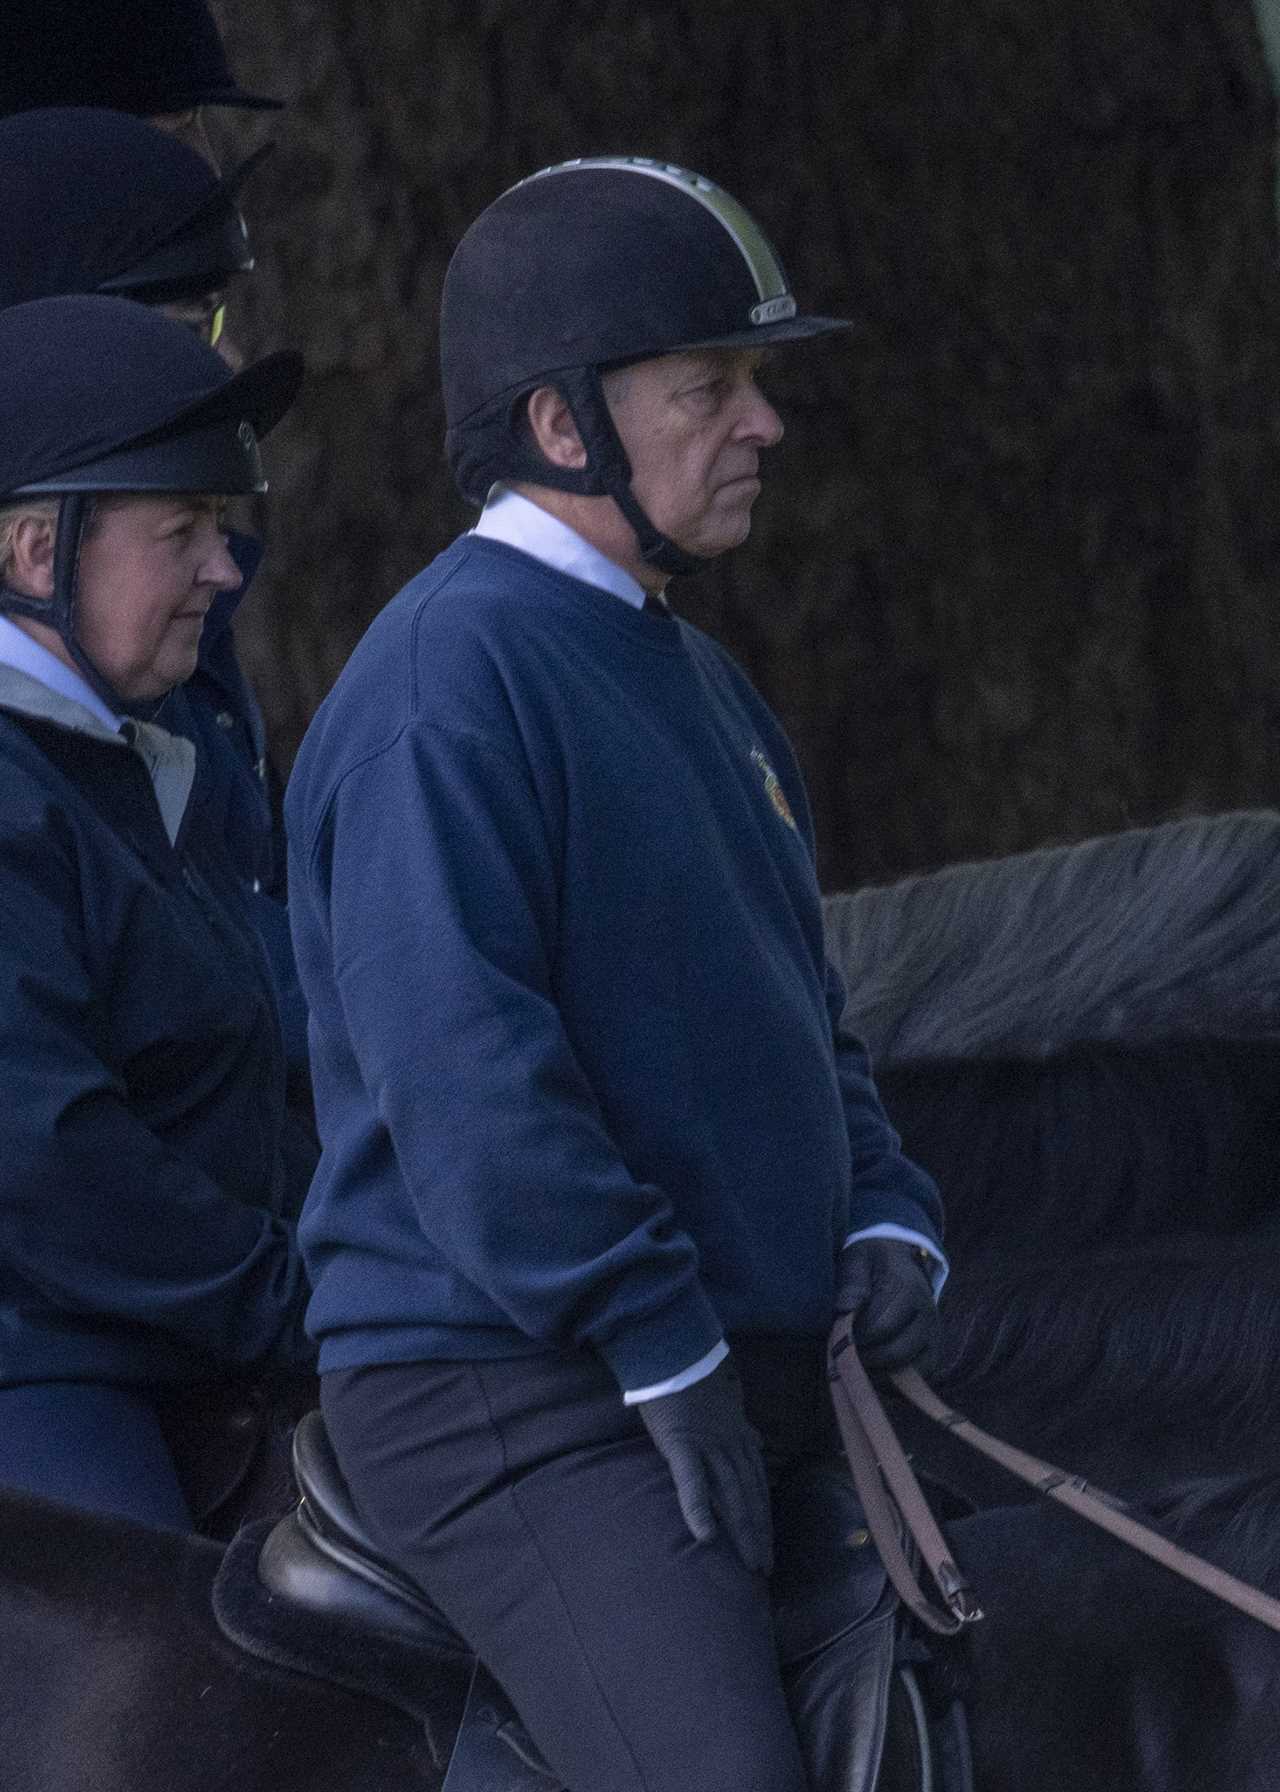 Prince Andrew seen for first time after claims he ‘lobbied hard’ to stop Charles from becoming King